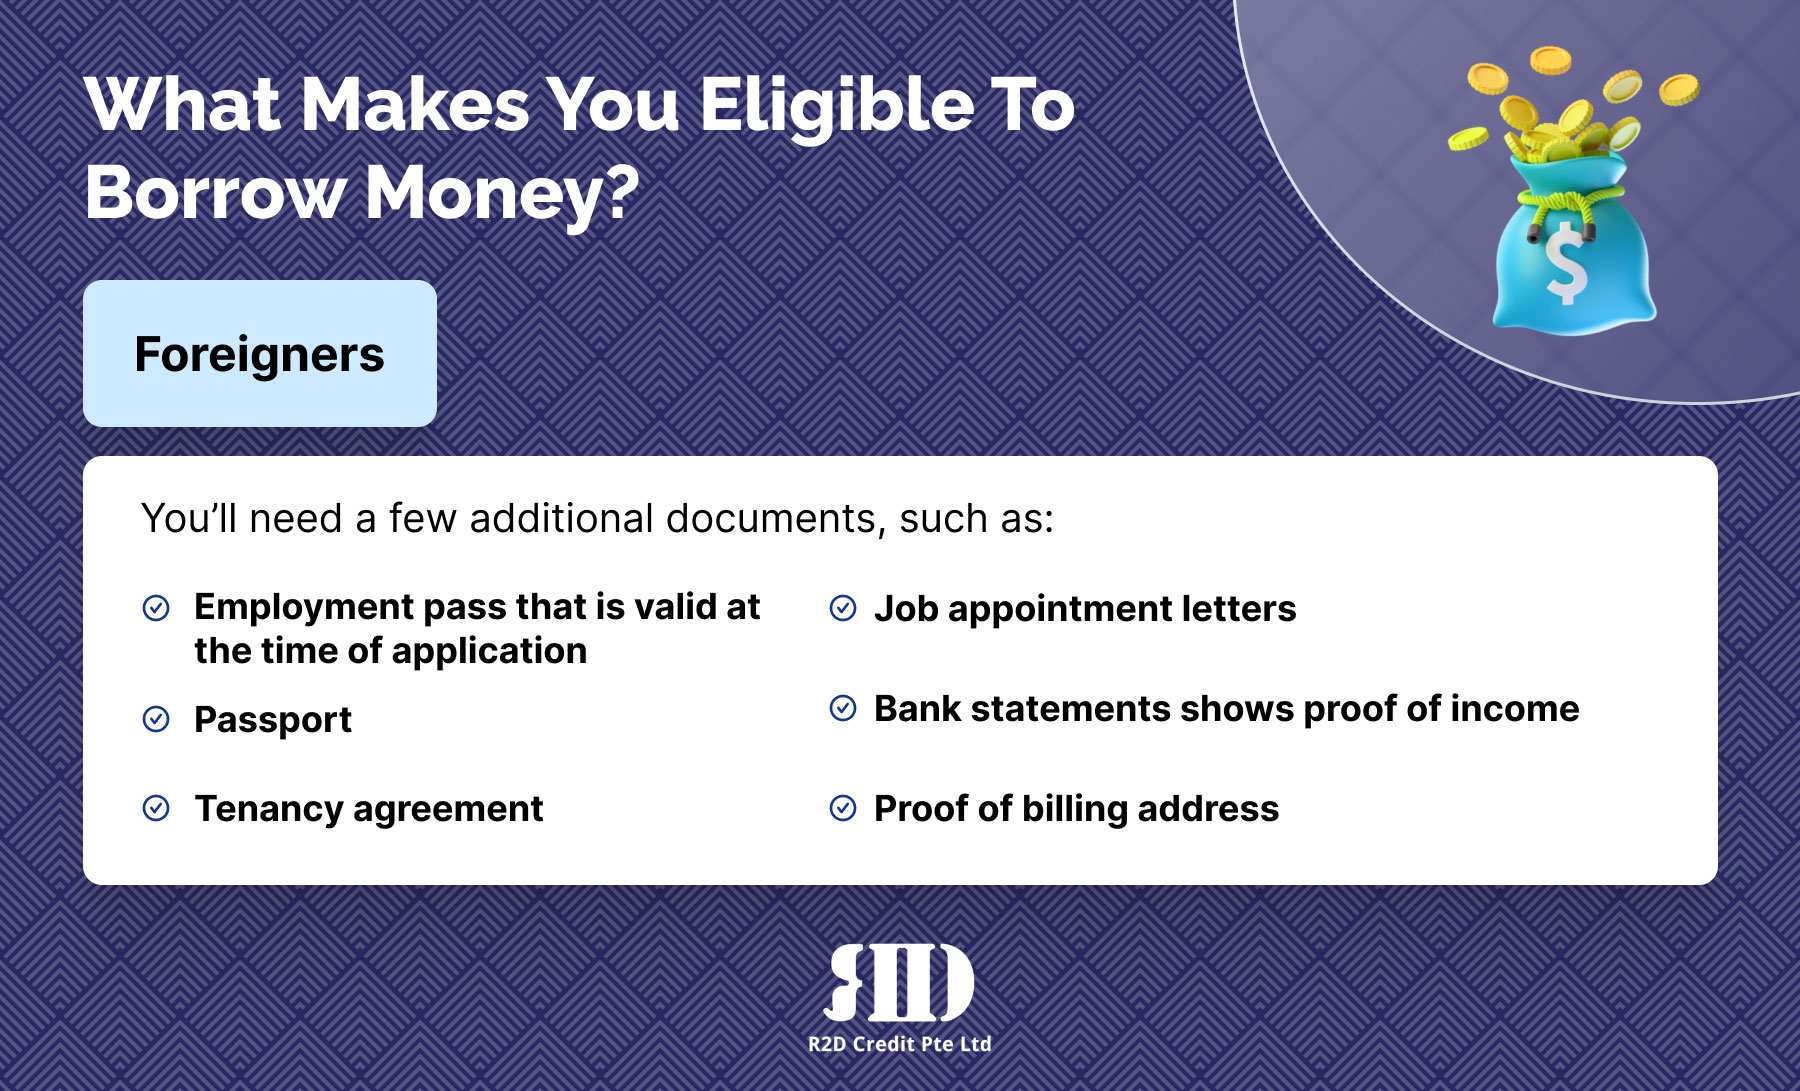 A simple infographic listing the loan application requirements for a foreigner